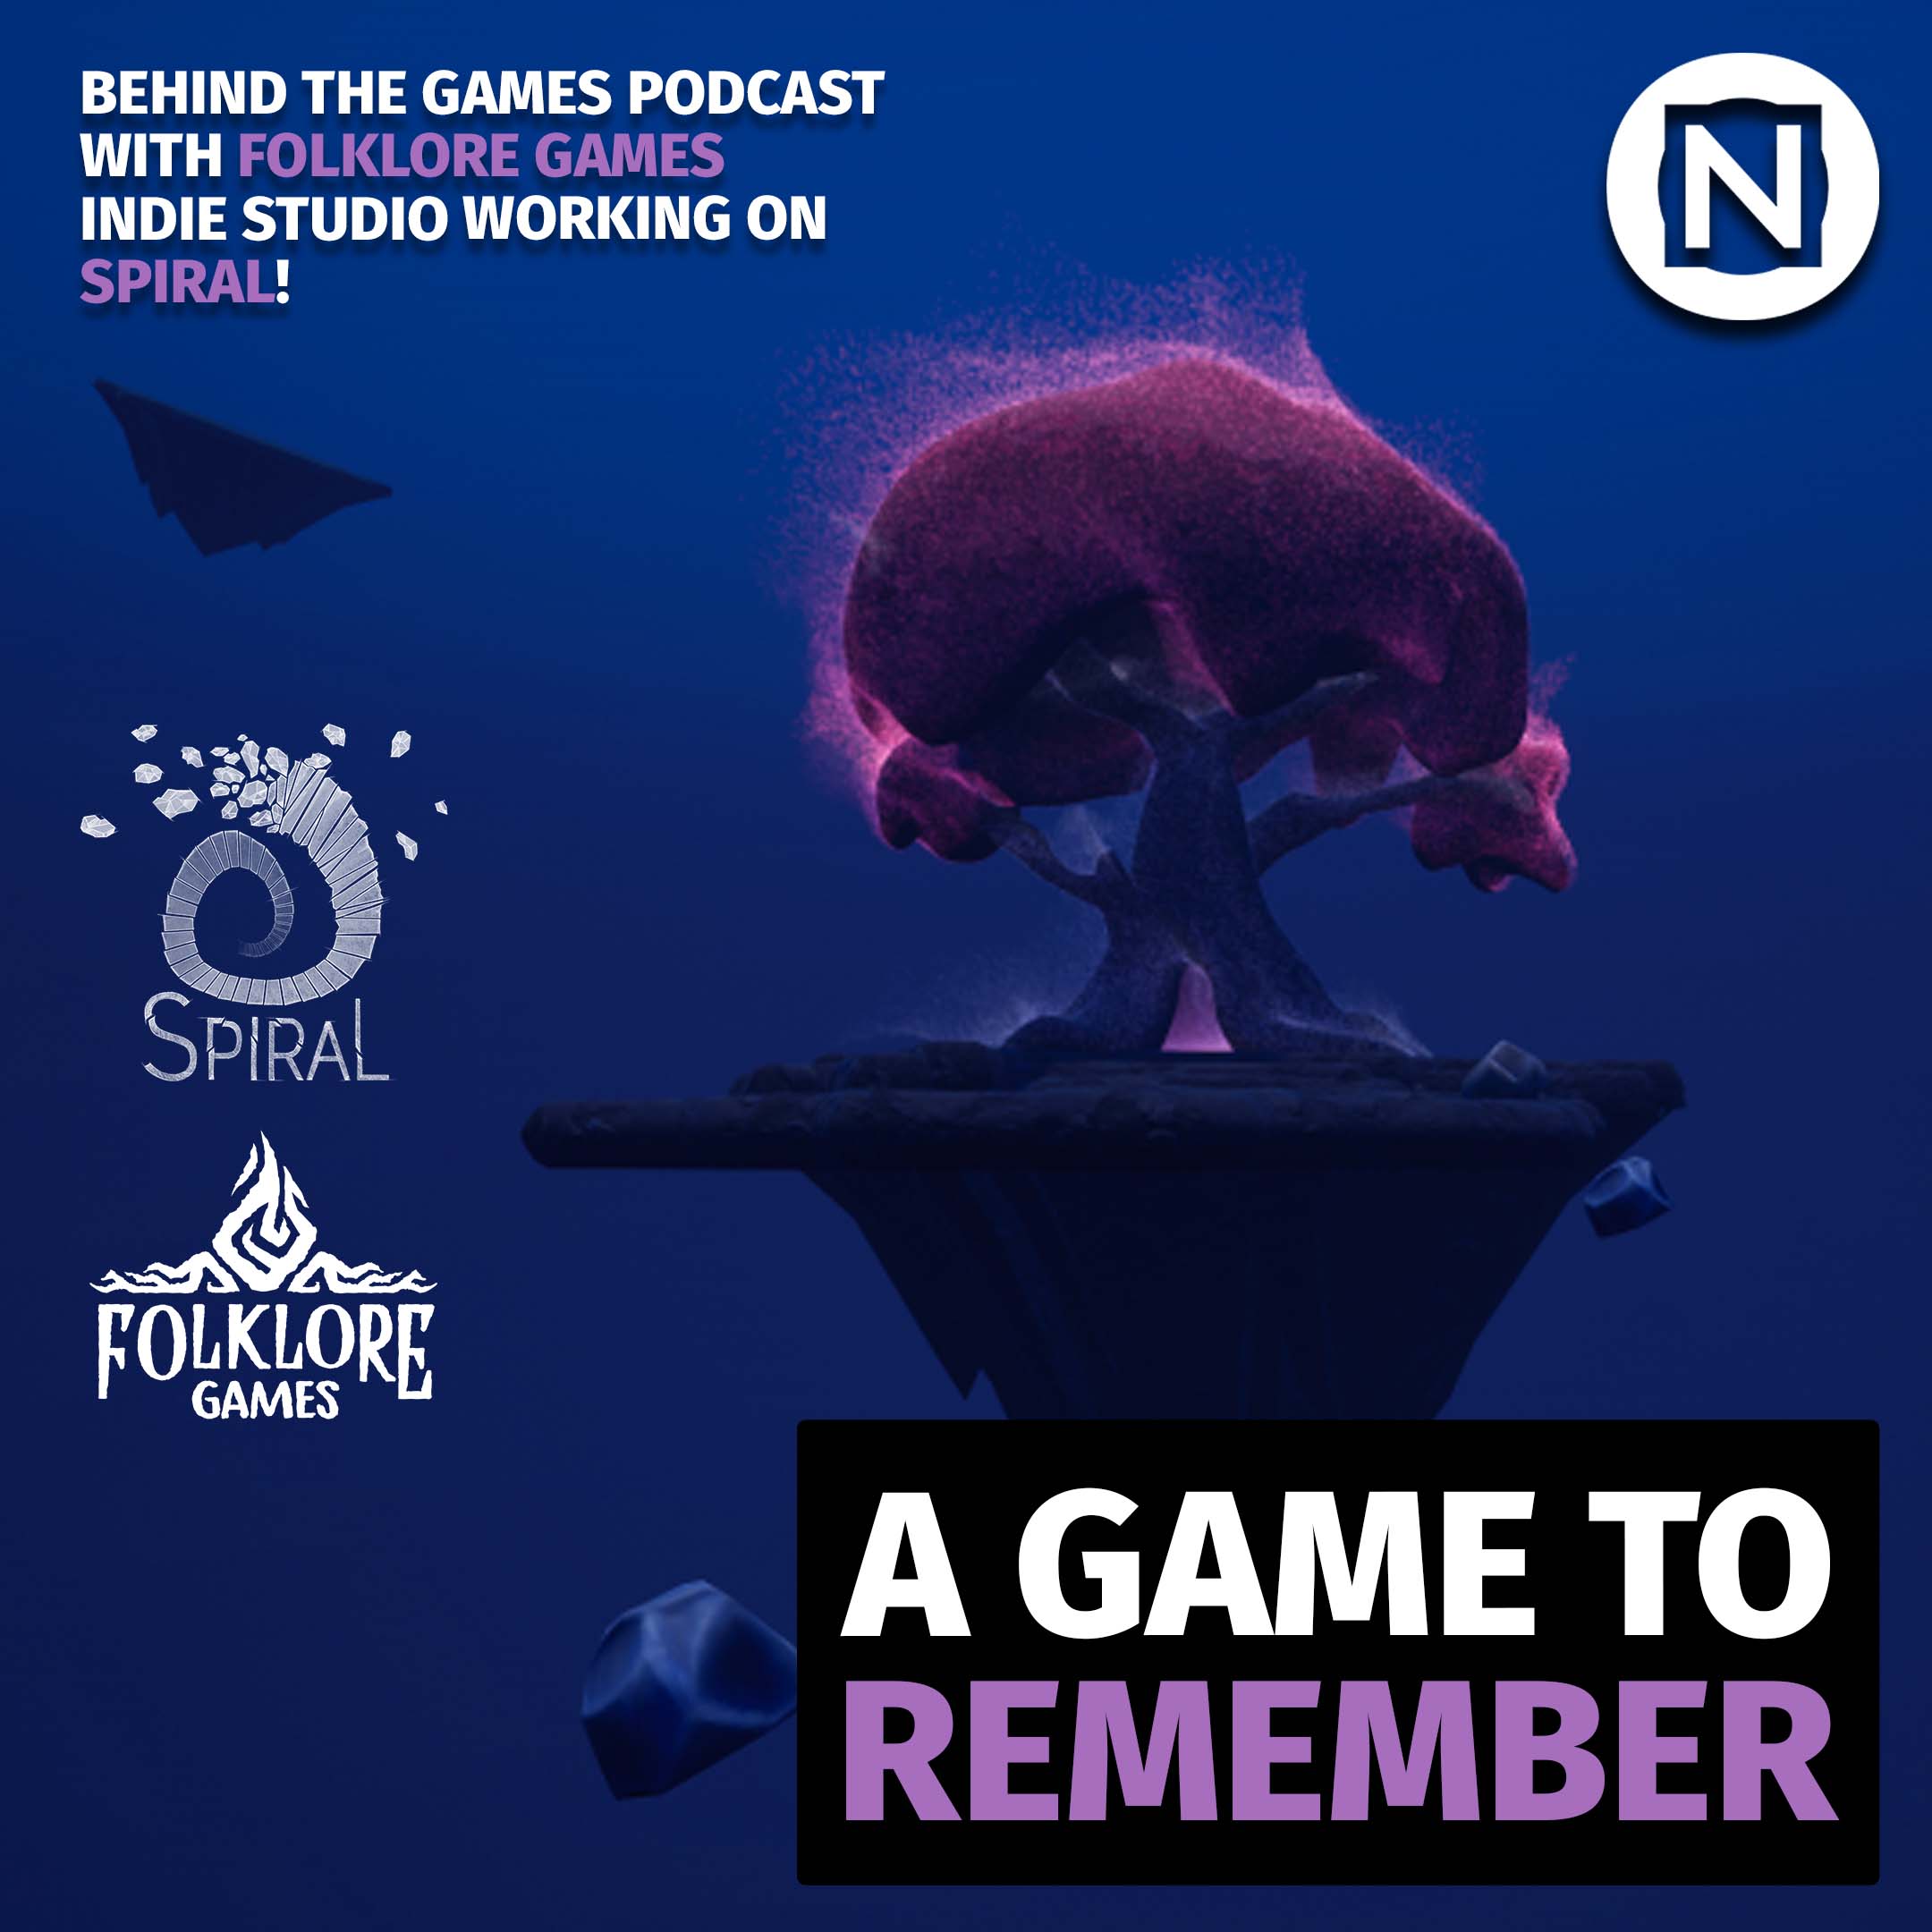 A Game To Remember – Behind The Games chat with Folklore Games